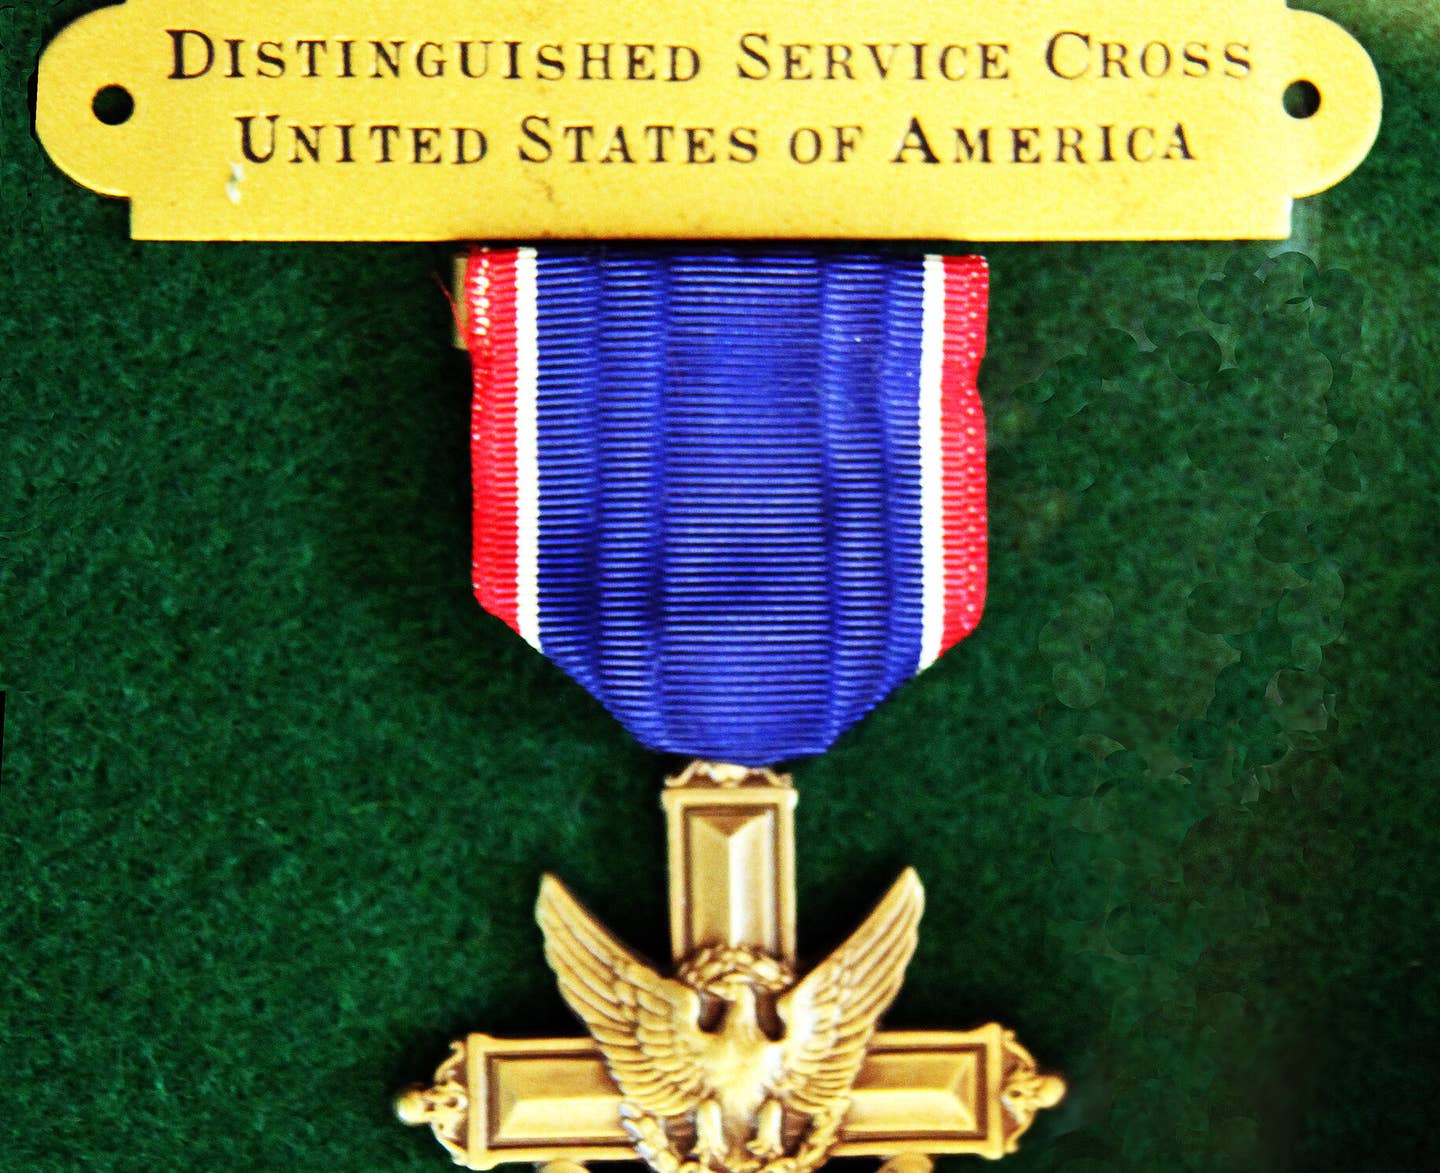 Chin received the distinguished service cross towards the end of his life